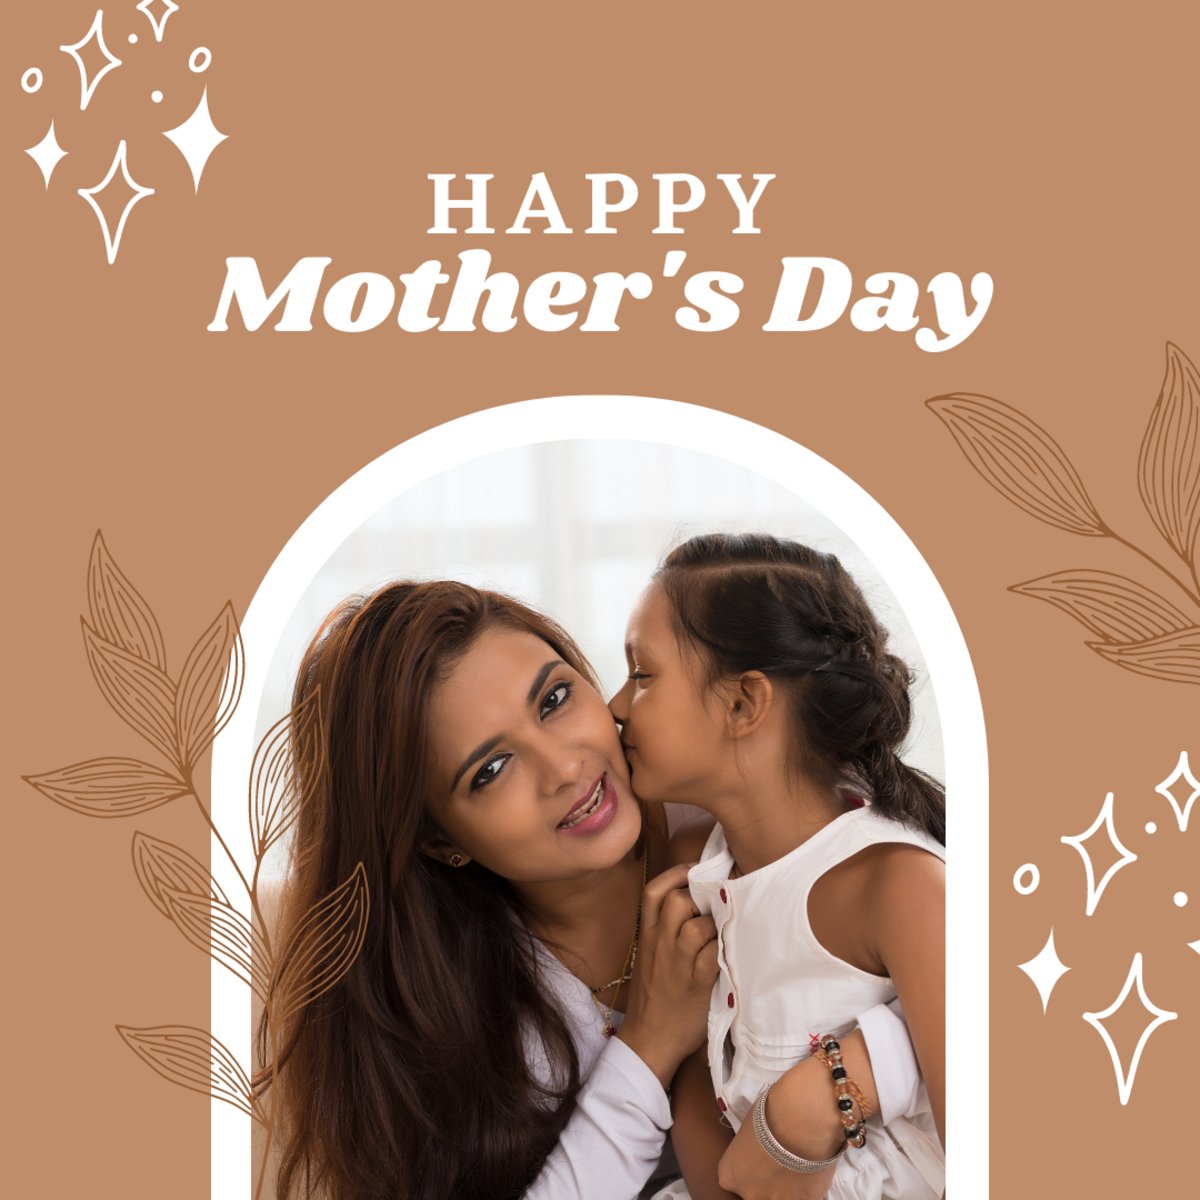 Super Value Inn Fredericksburg wants to wish a very special Happy Mother's Day to all the amazing mothers out there!💕 Have a wonderful day celebrating💐 #mothersday